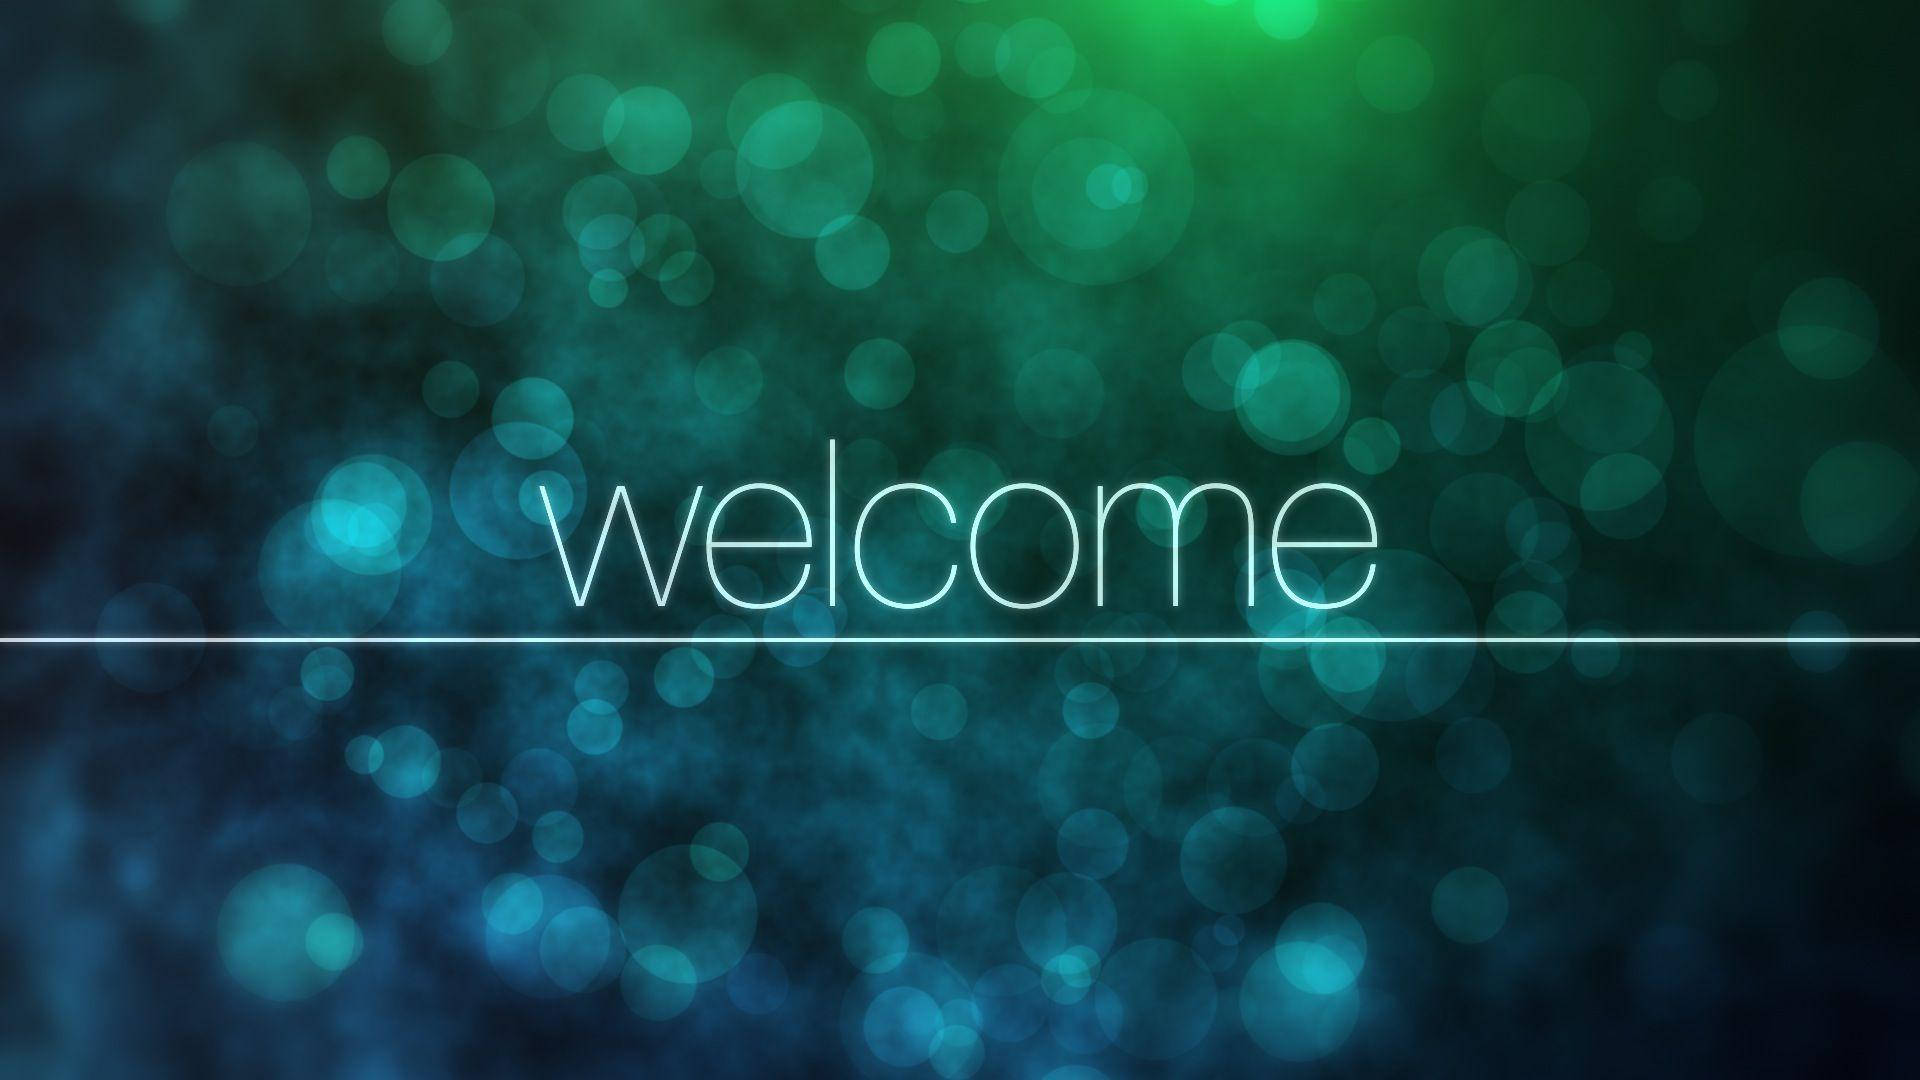 Welcome Green Abstract Particles Wallpaper